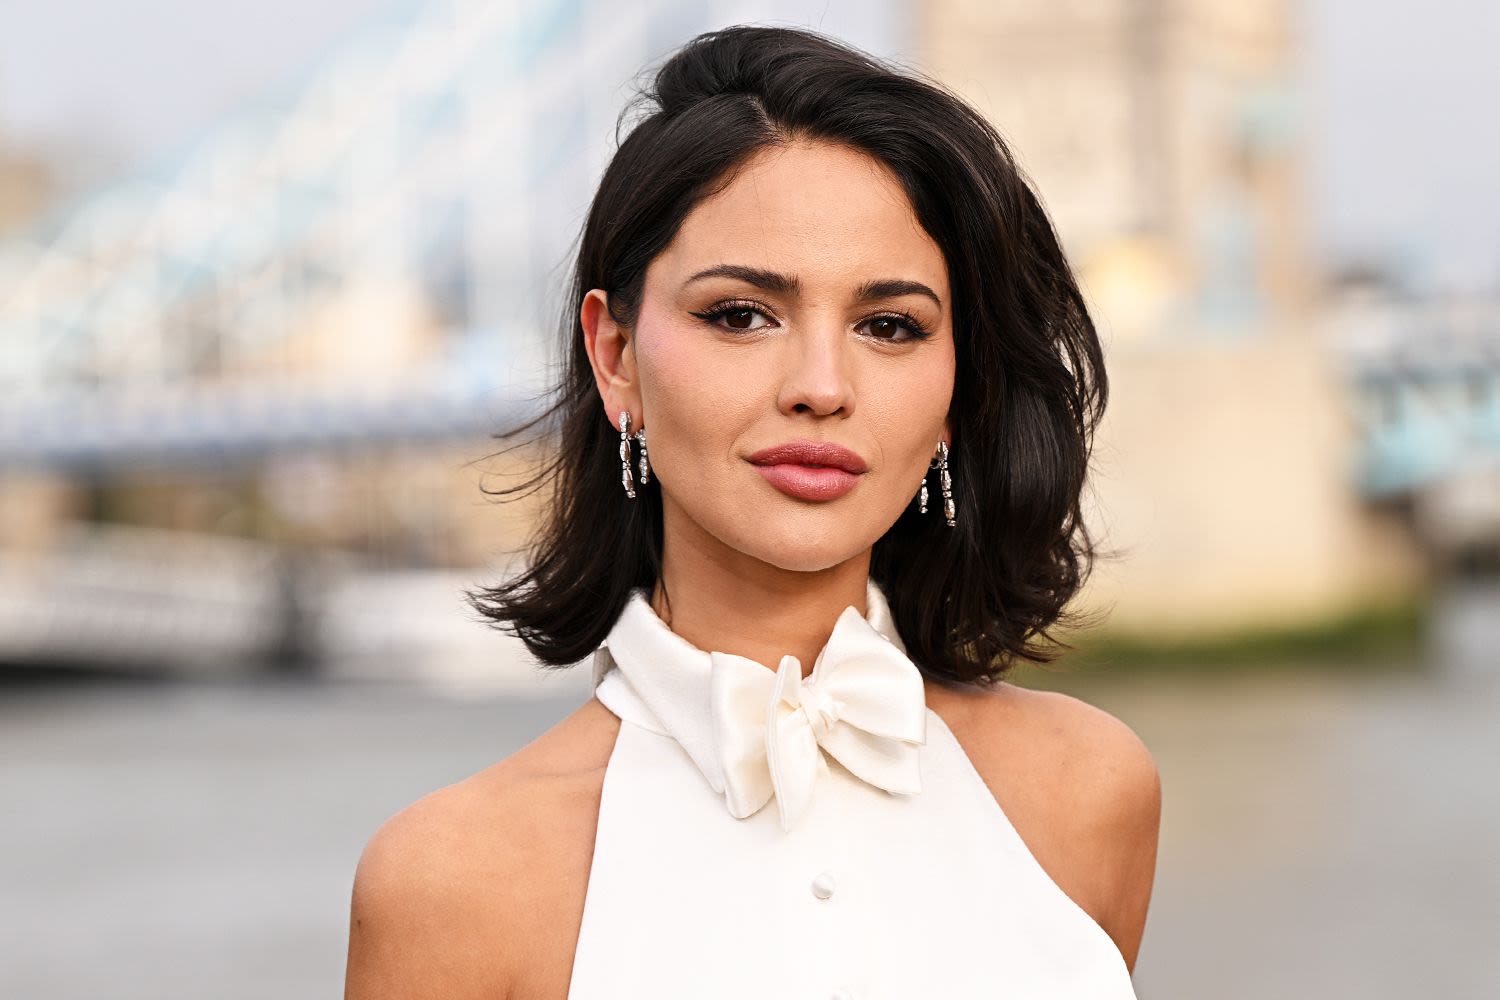 Eiza González Says She Was 'One of the Lads' on “Ministry” Set: 'I'm Sort of a Tomboy Myself' (Exclusive)